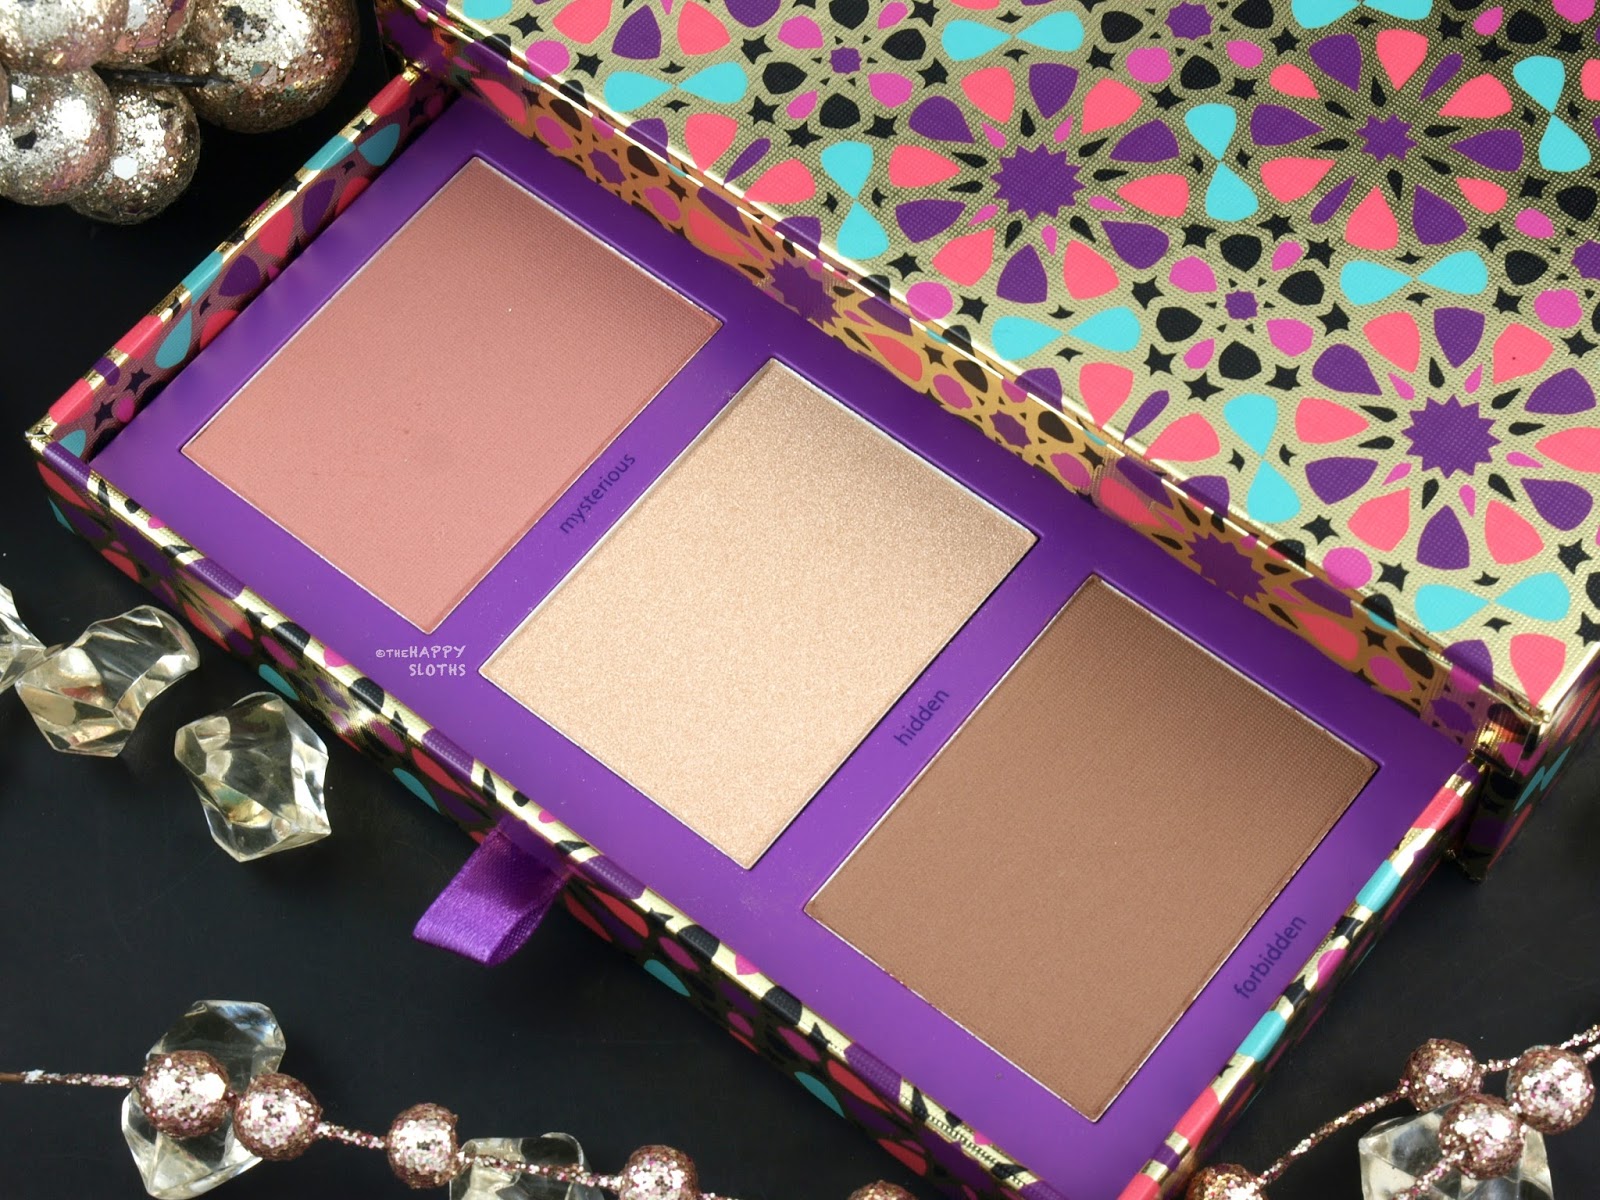 Tarte Holiday 2017 Tarteist Trove Collector's Set: Review and Swatches